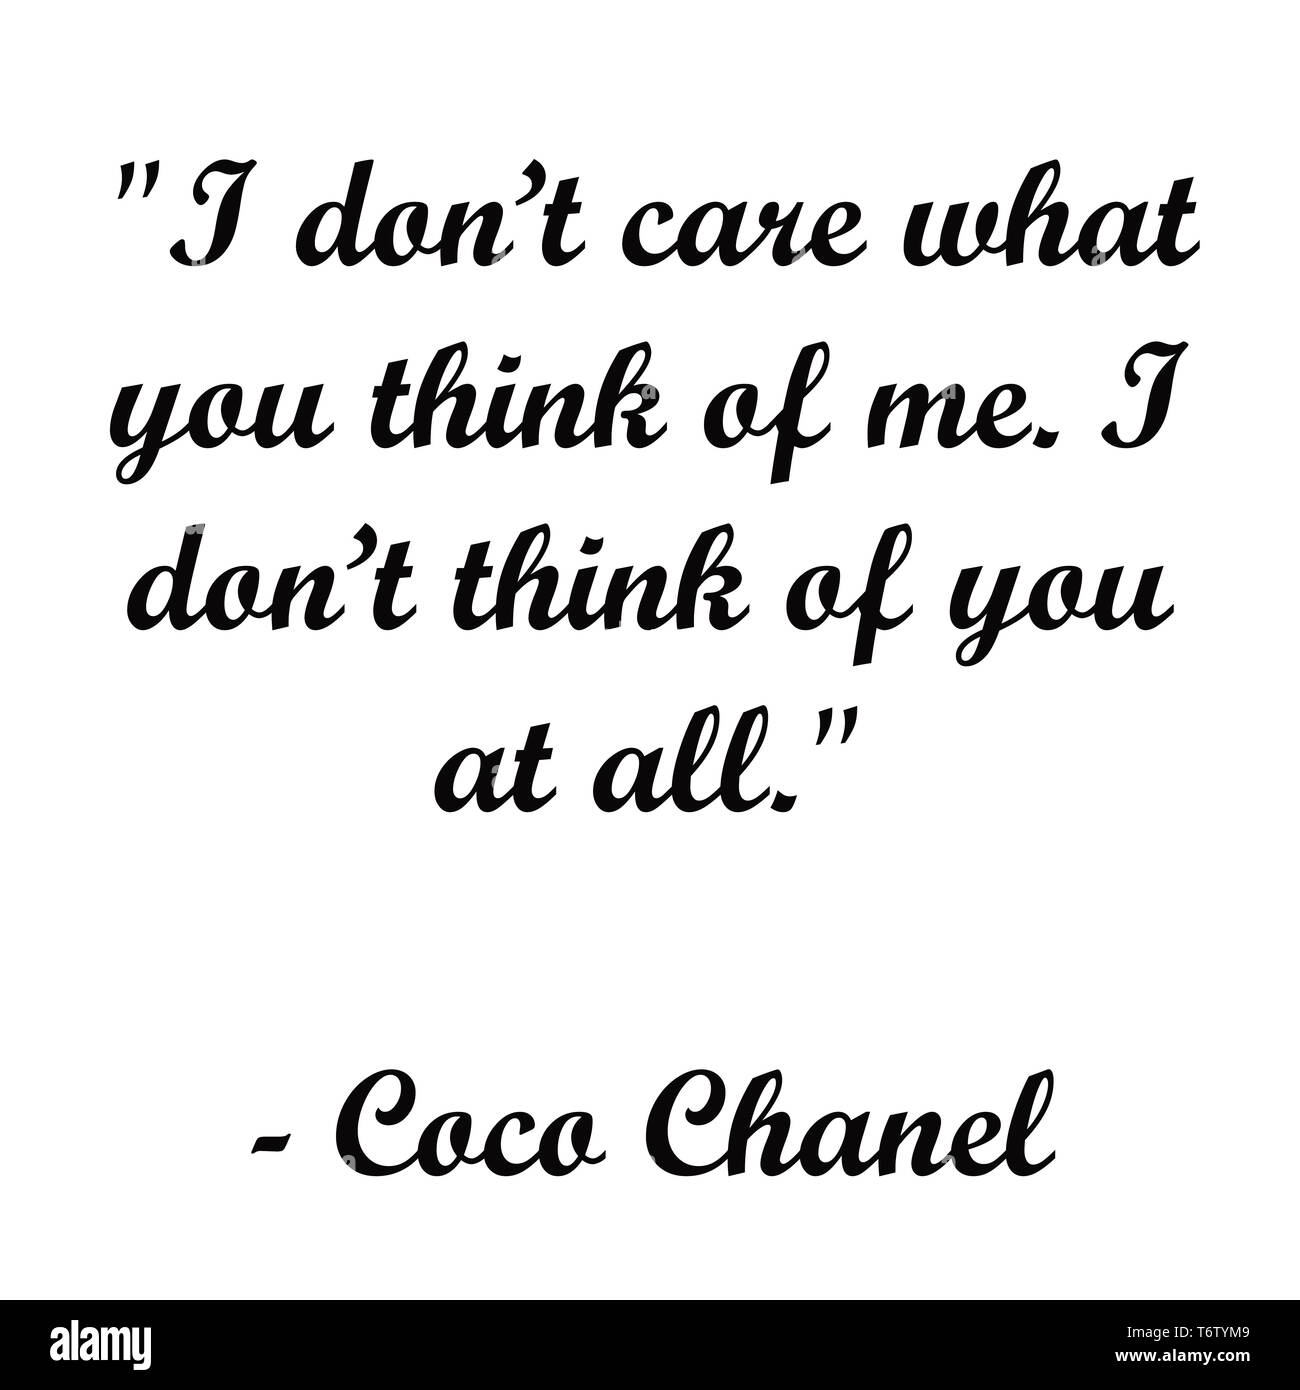 8 Inspirational Photo Quotes  Coco Chanel on Fashion and Lifestyle   Archilivingcom  Web Magazine by Architects and Designers